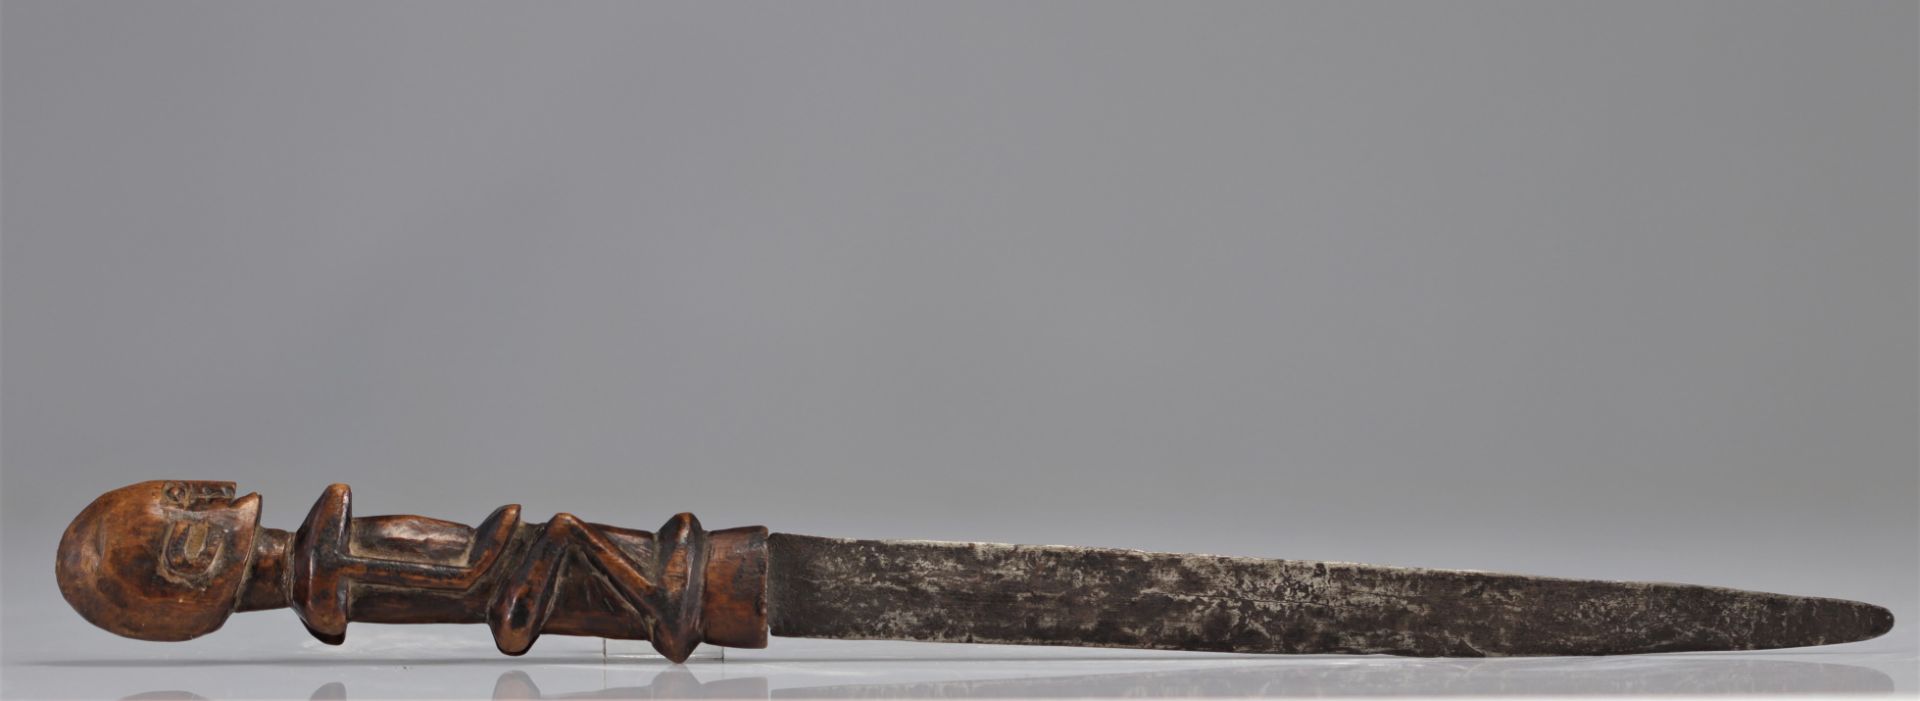 Dogon circumcision knife with carved handle in classic Dogon style - Image 6 of 6